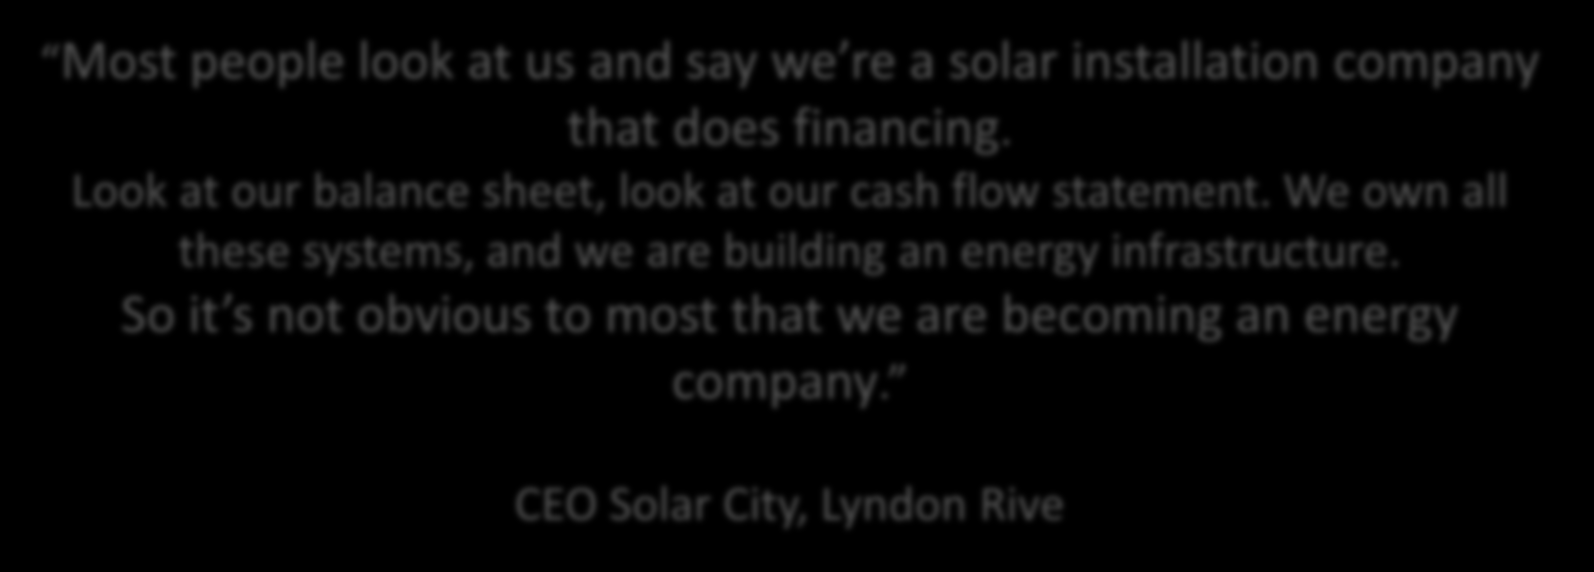 Forretningsmodellen til SolarCity Most people PV look at us and say we re a solar installation company Systemer that does financing. Pakkeløsning El-bil?